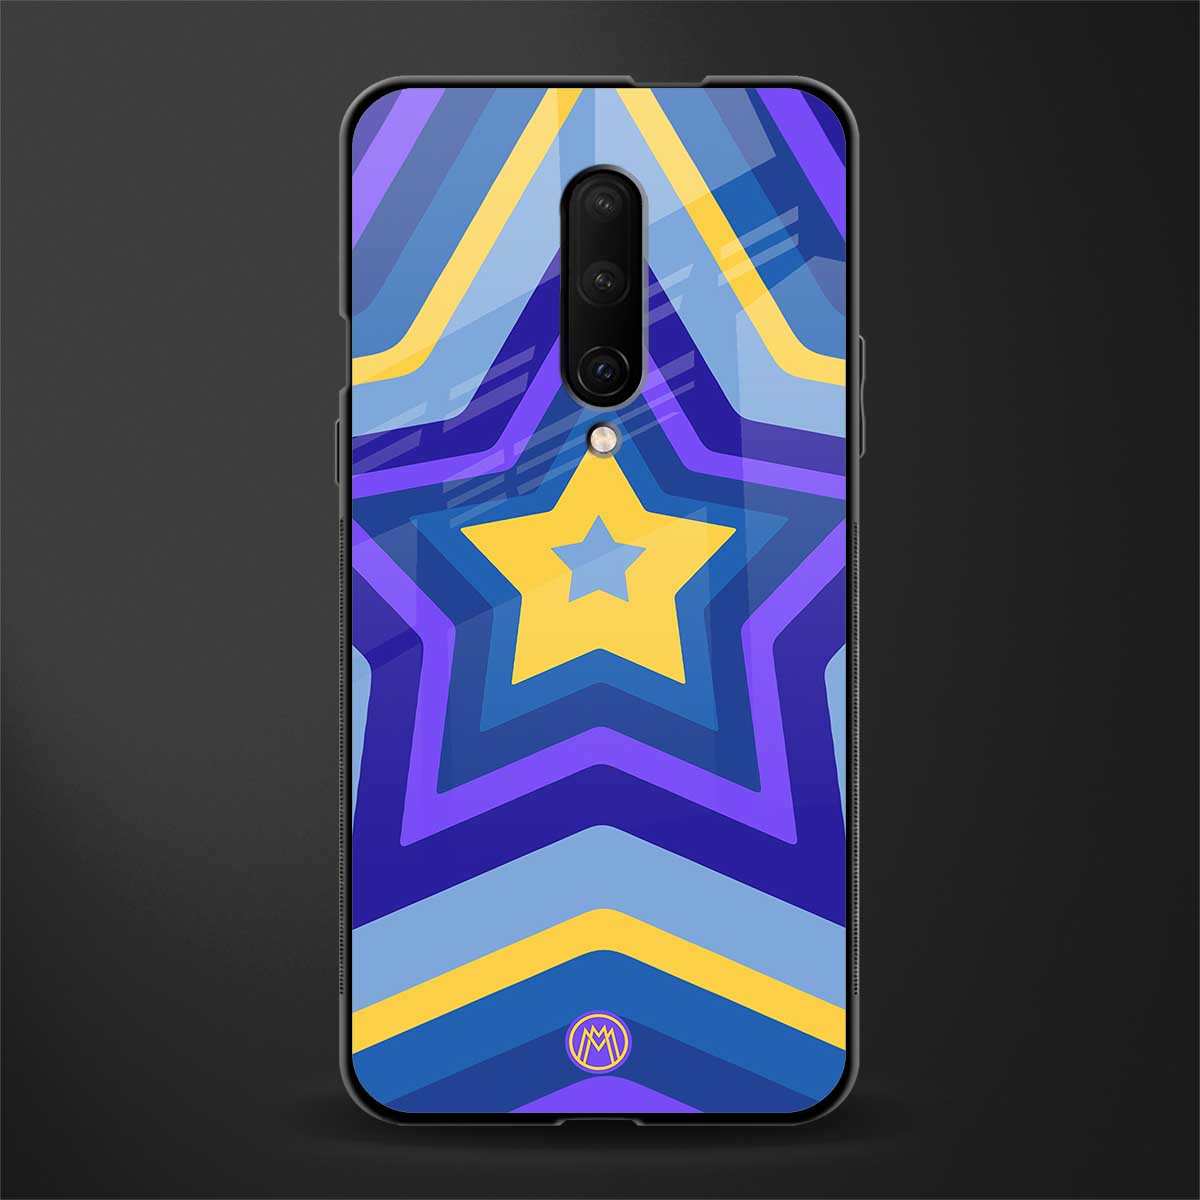 y2k yellow blue stars glass case for oneplus 7 pro image